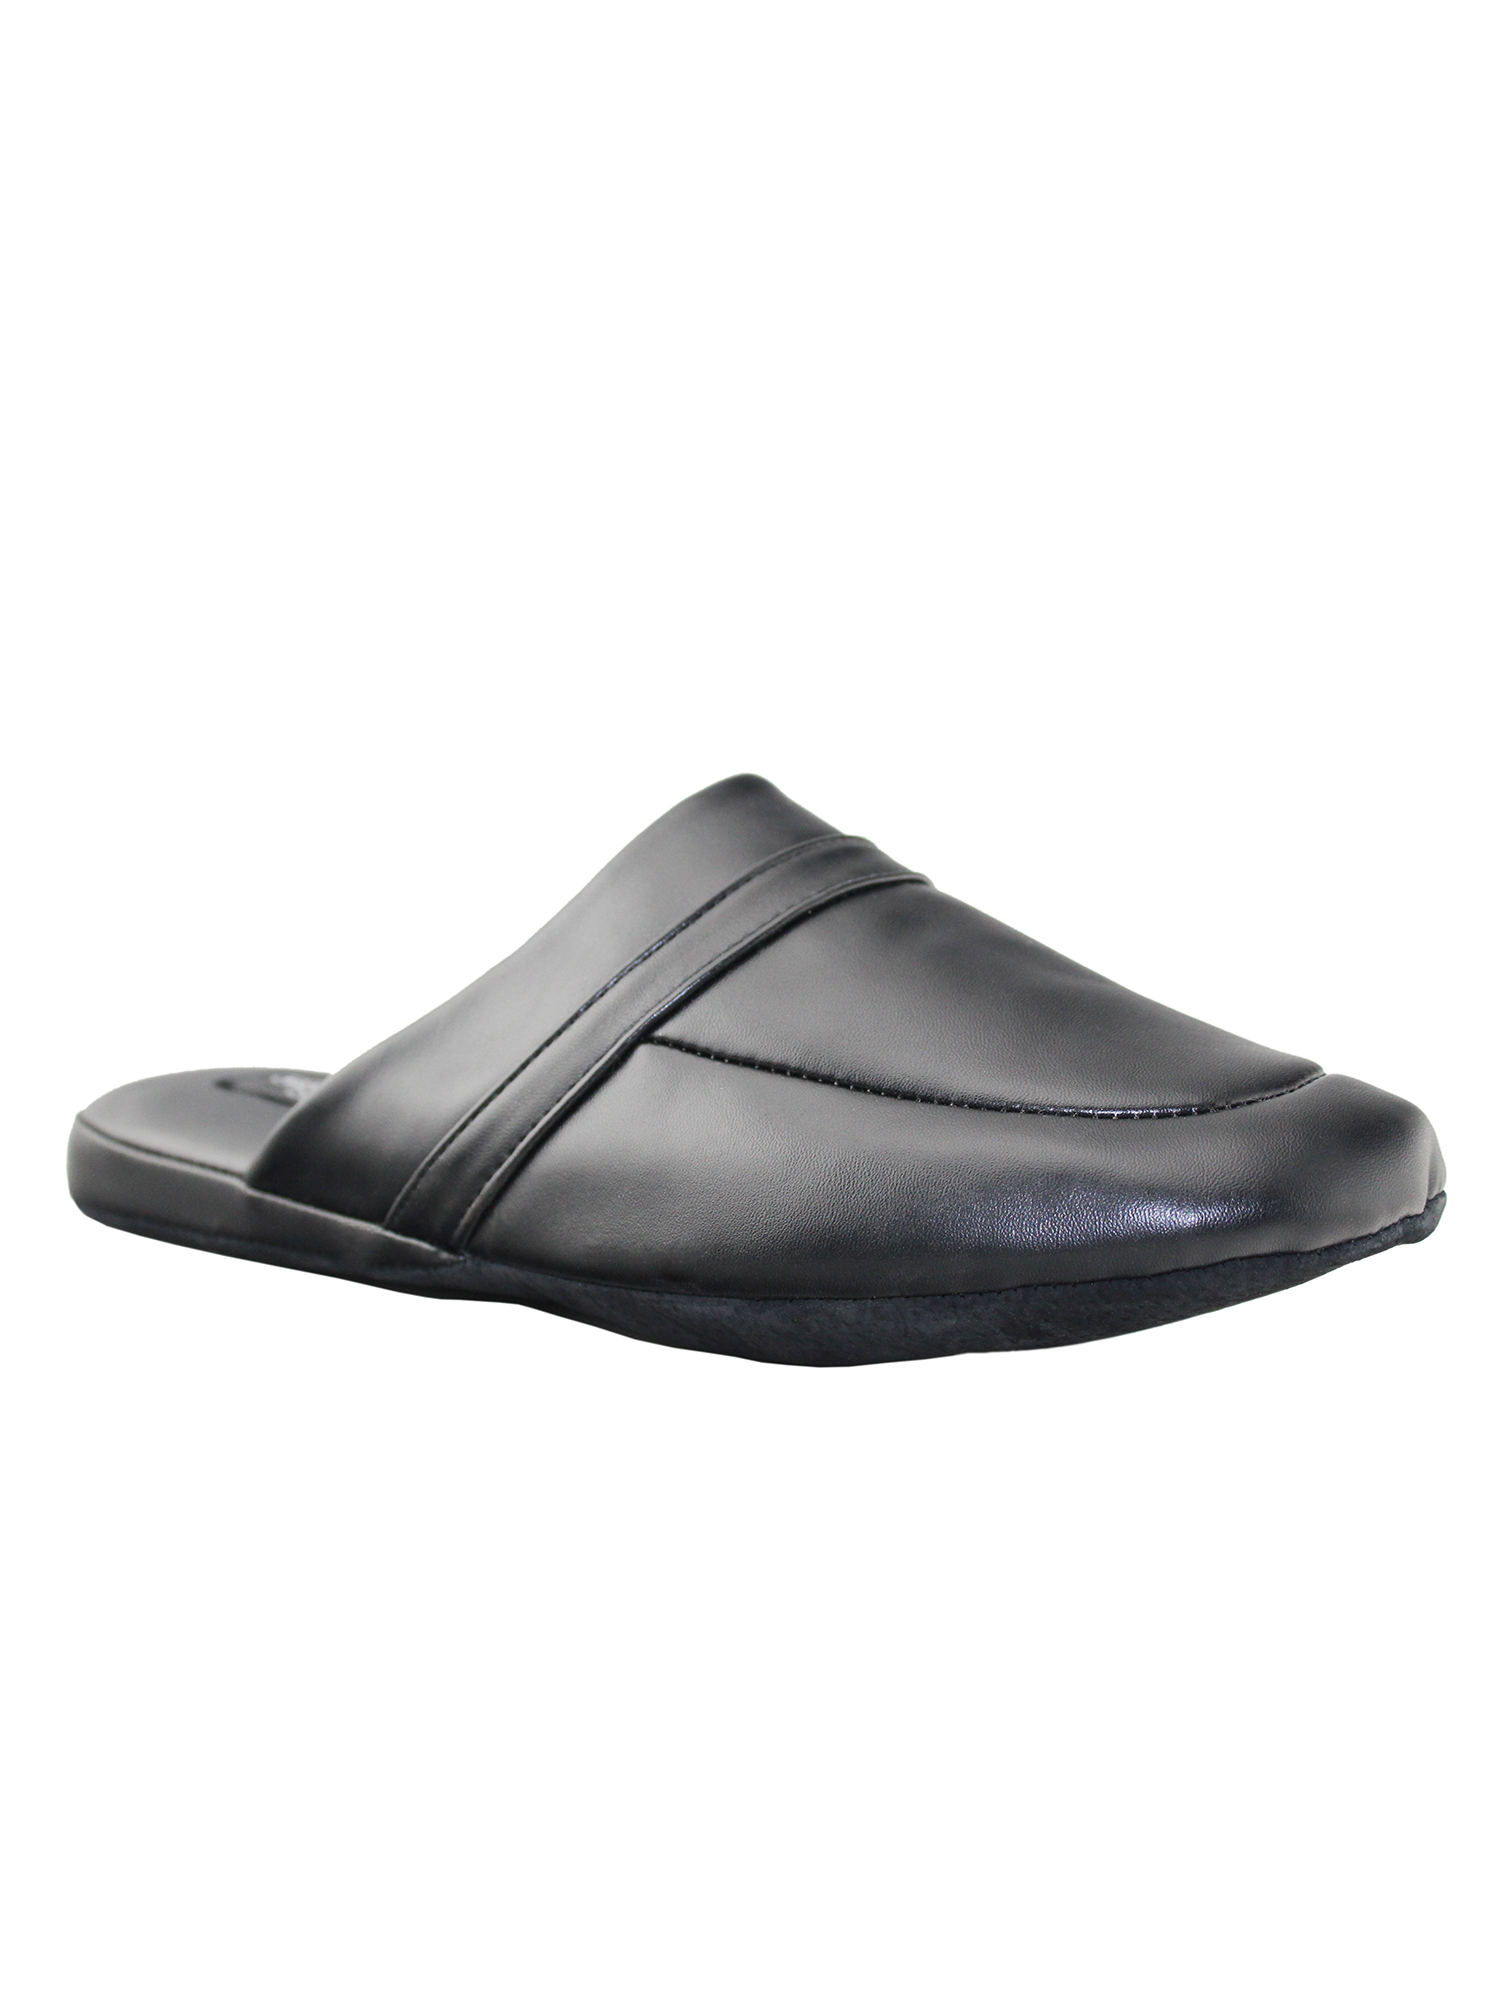 Mens Leather Slippers Open Back Slides for Men Comfortable Indoor Home Shoes - image 1 of 6